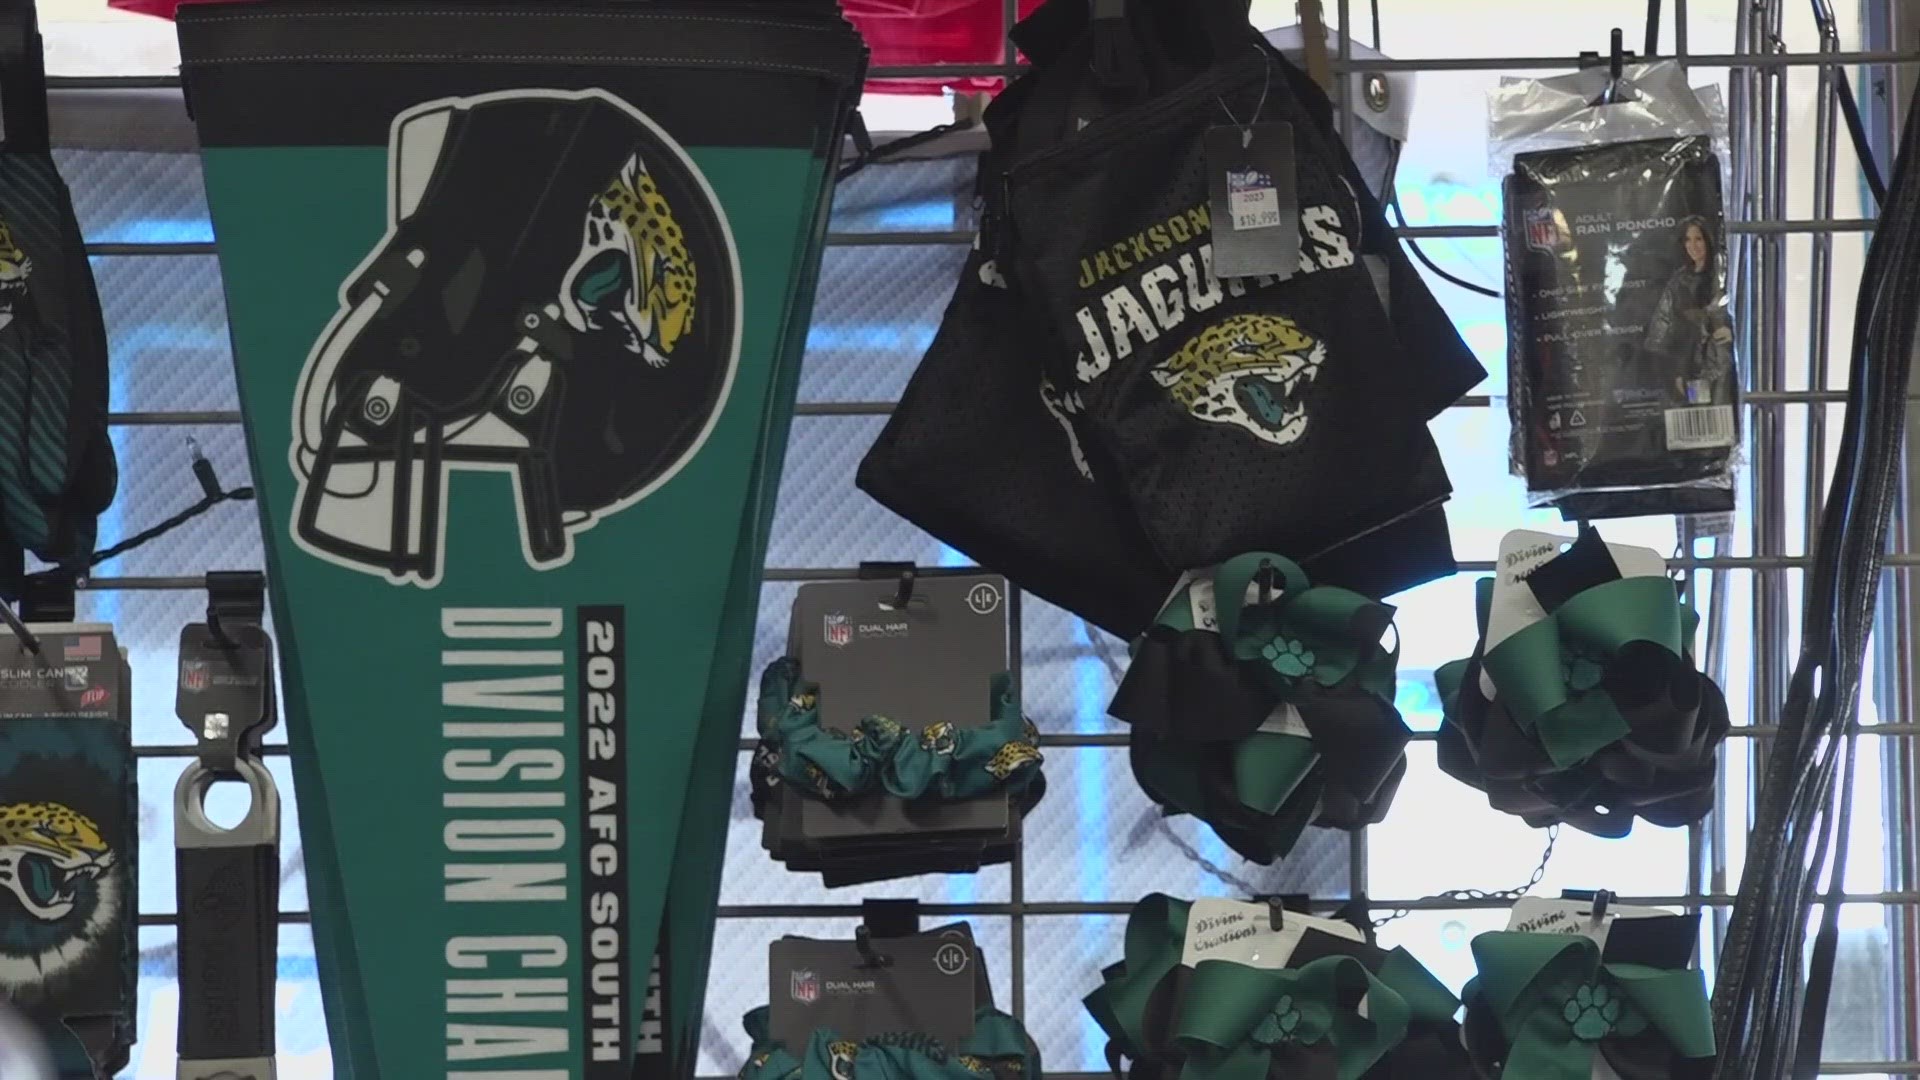 The owner of Sports Mania in Jacksonville Beach said he pre-ordered roughly $50,000 worth of Jaguars gear before the season-ending loss to the Titans.